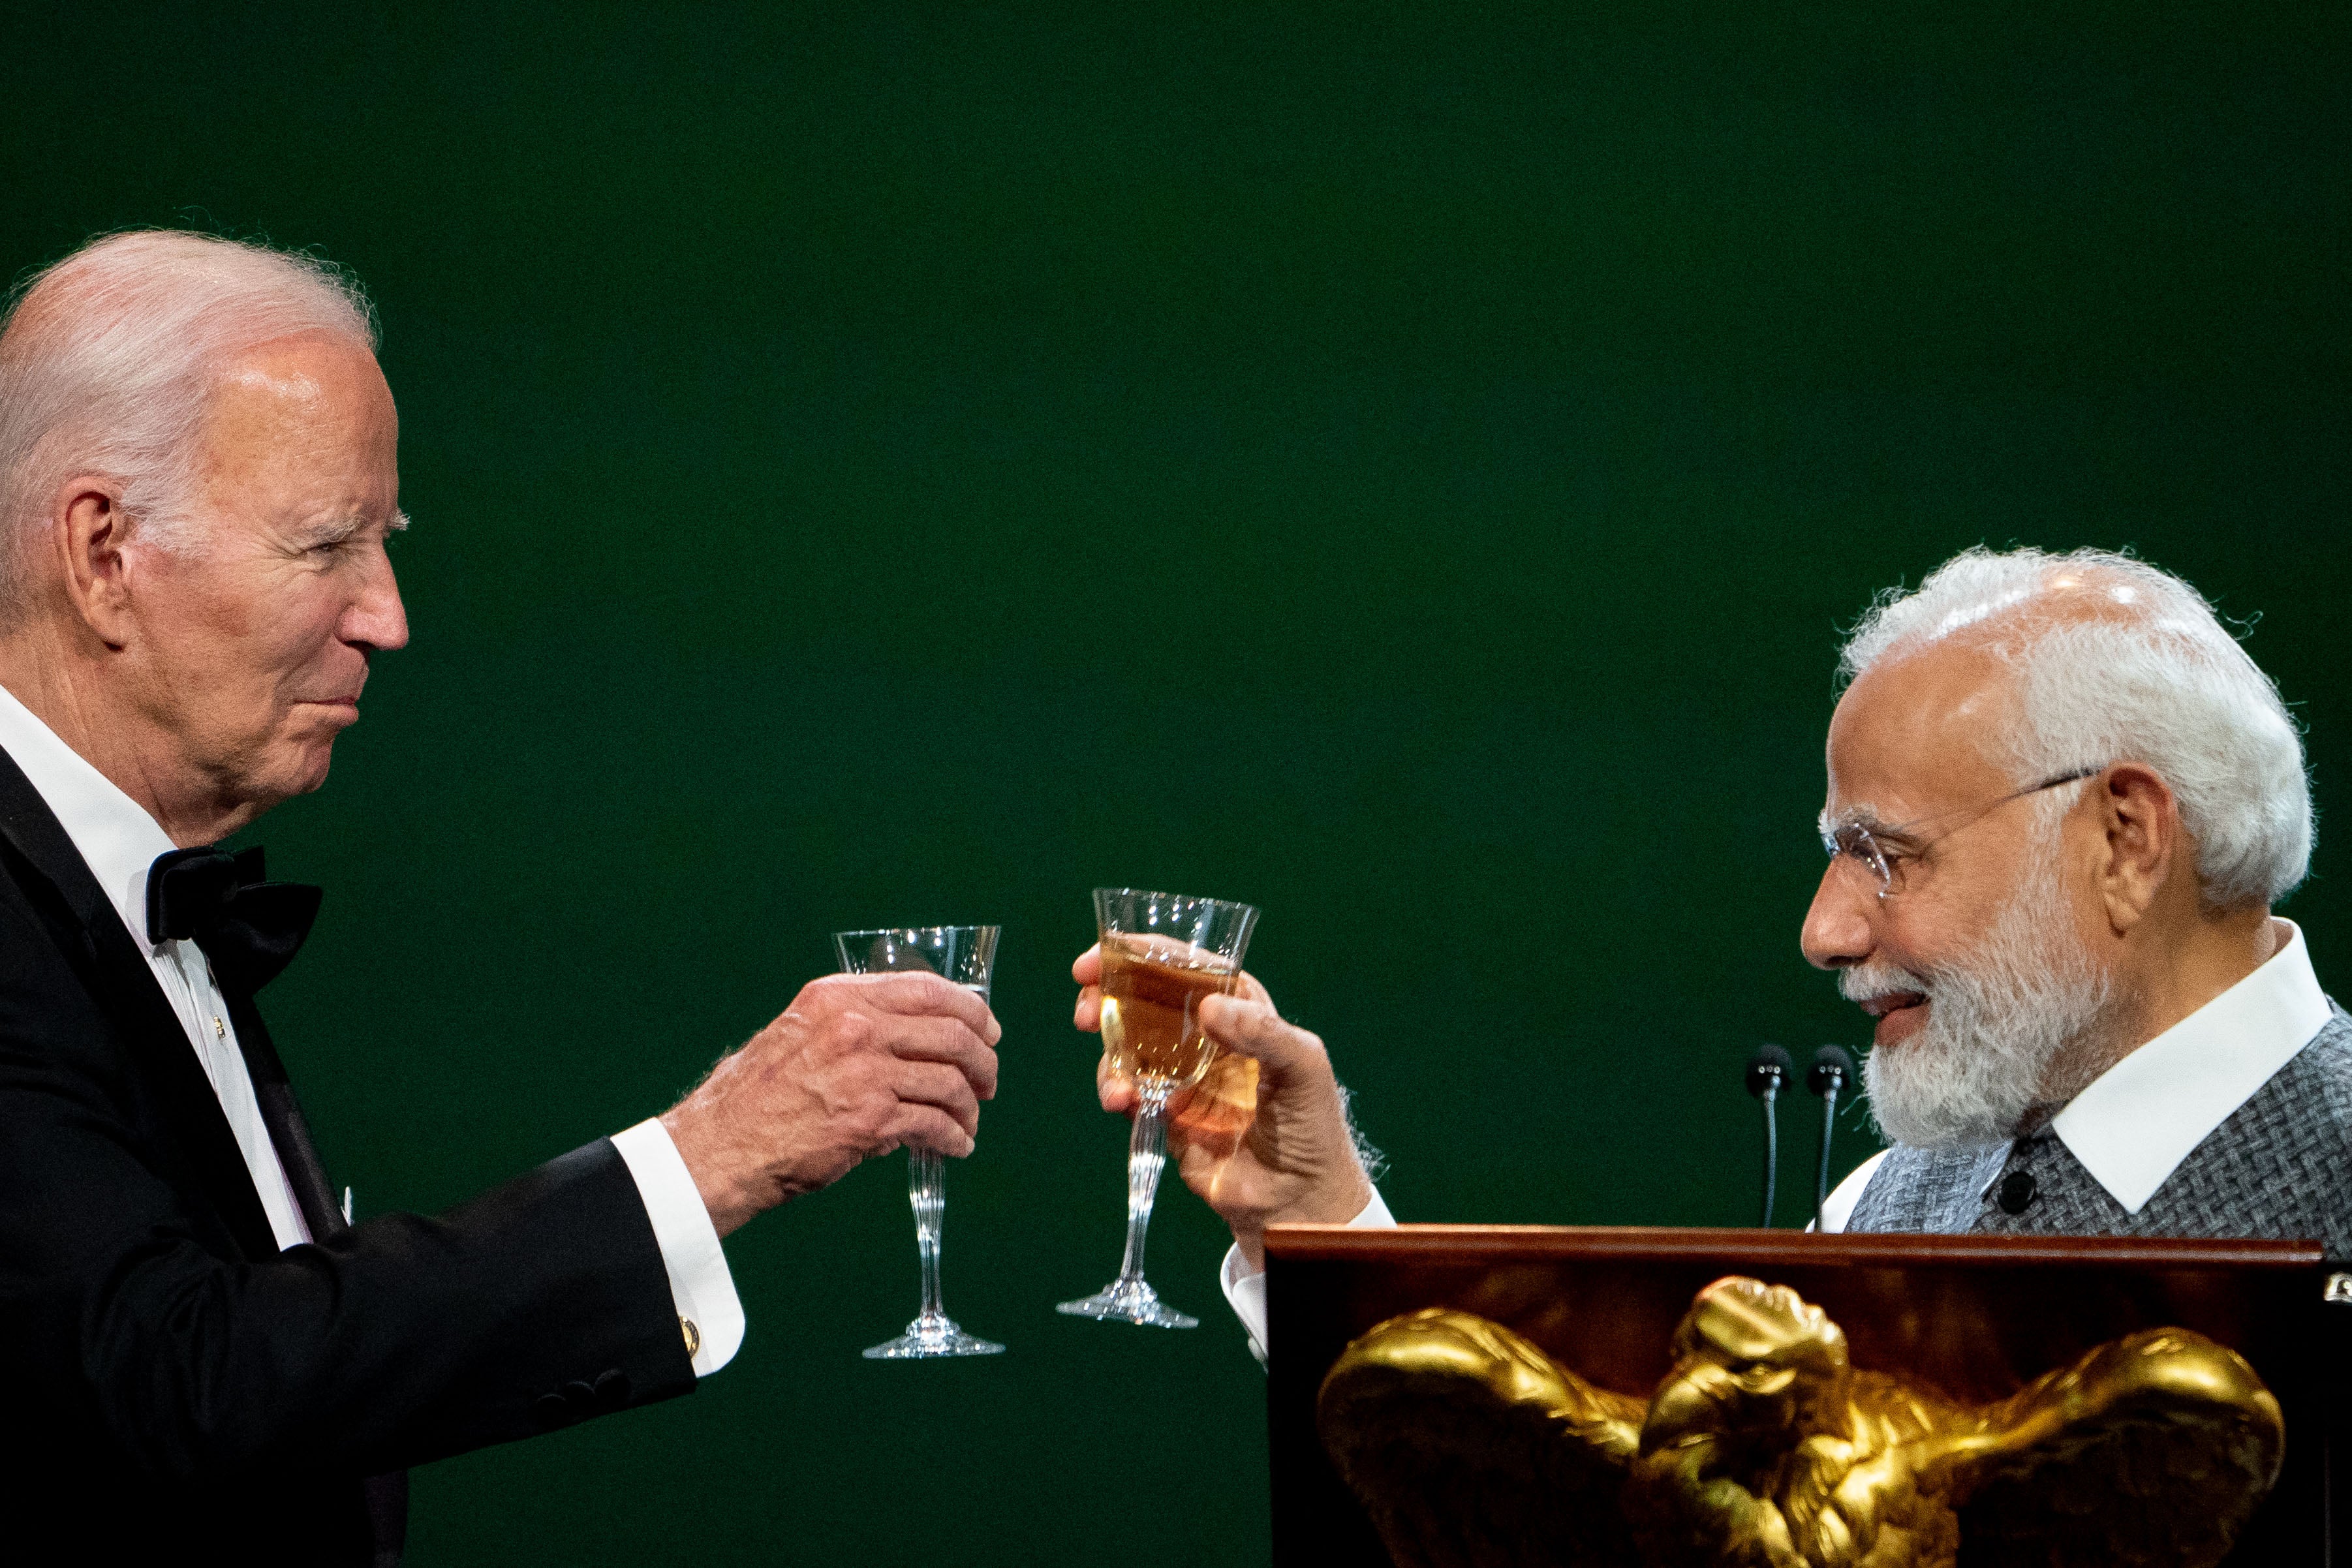 US president Joe Biden and India's prime minister Narendra Modi toast during an official state dinner at the White House